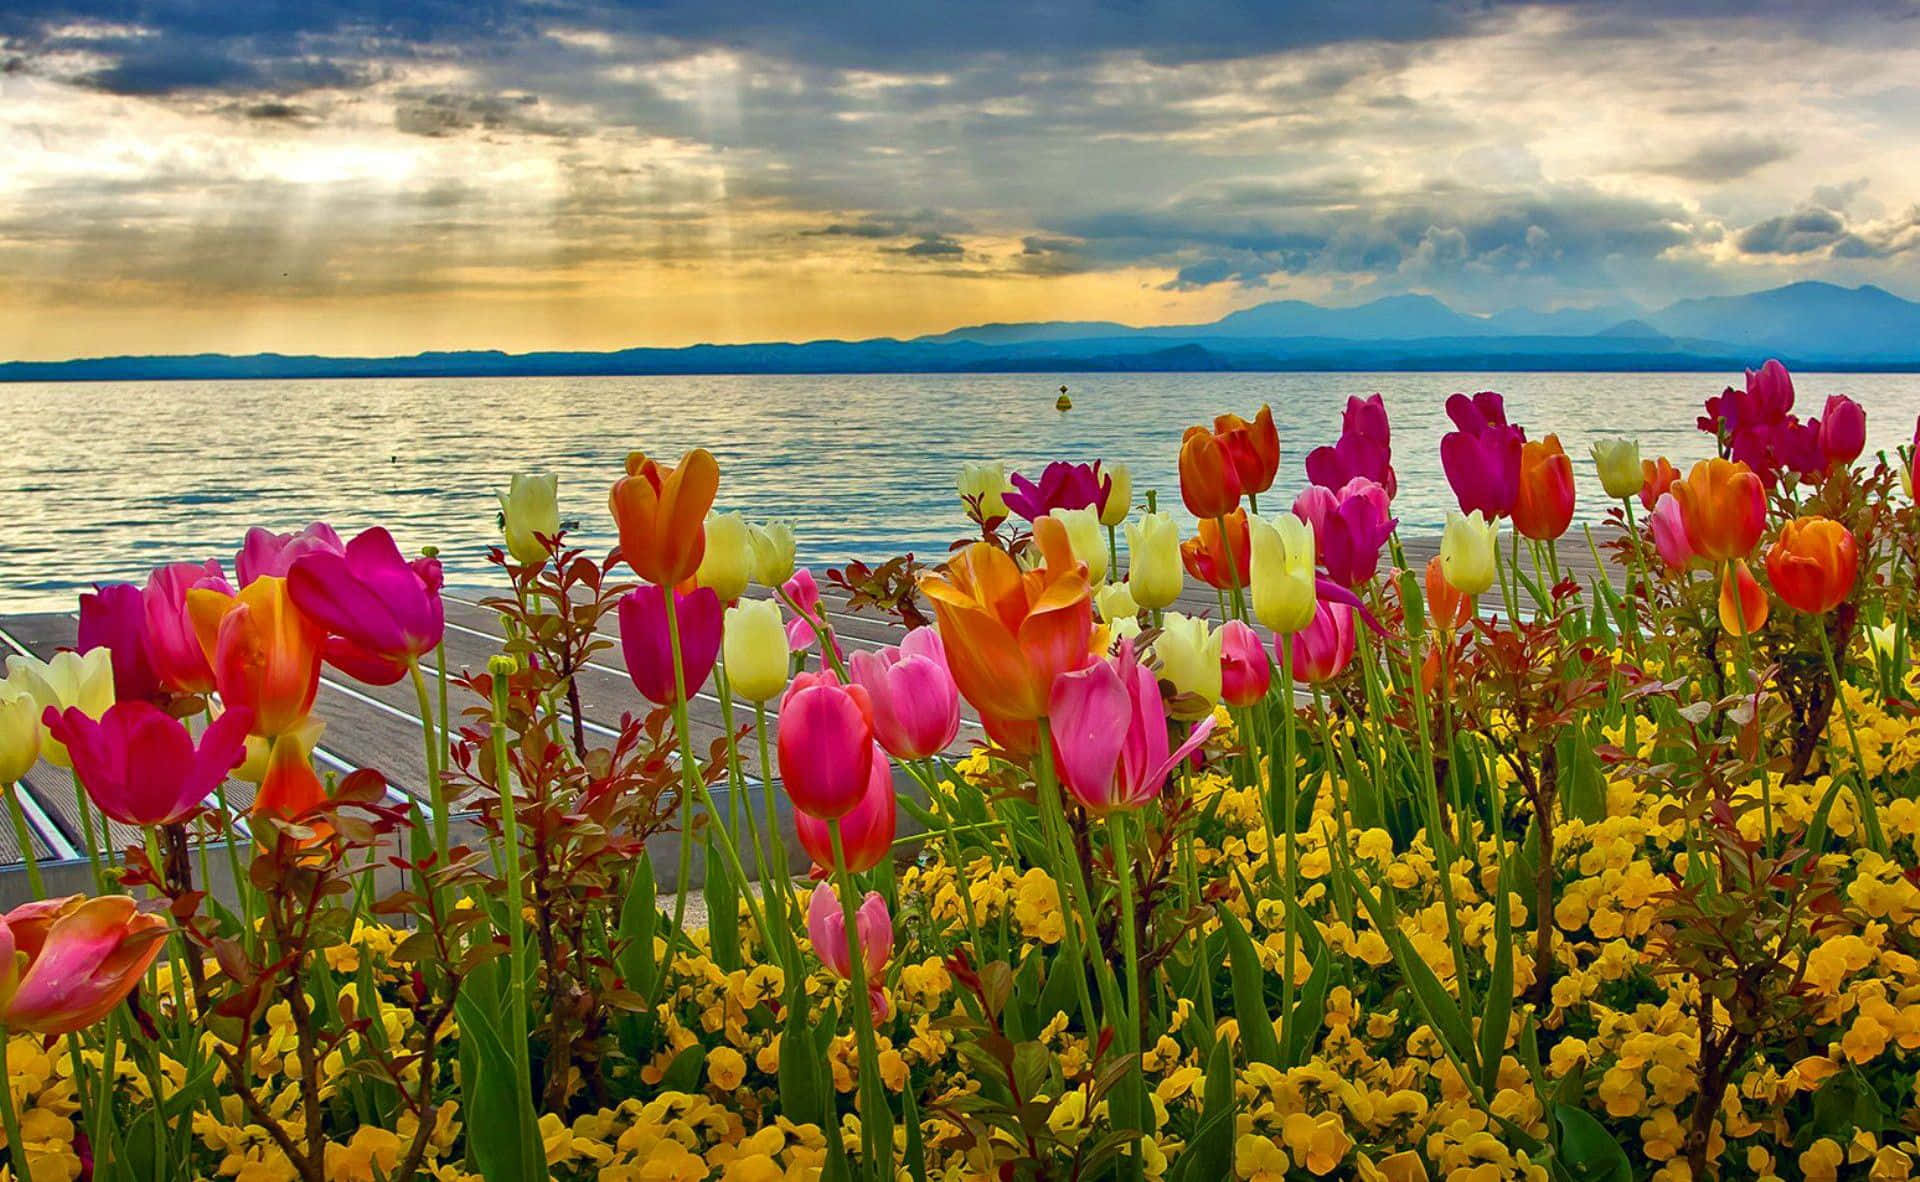 Enjoy the Beauty of Spring with a Vibrant Display of Colorful Flowers in Your Desktop Wallpaper